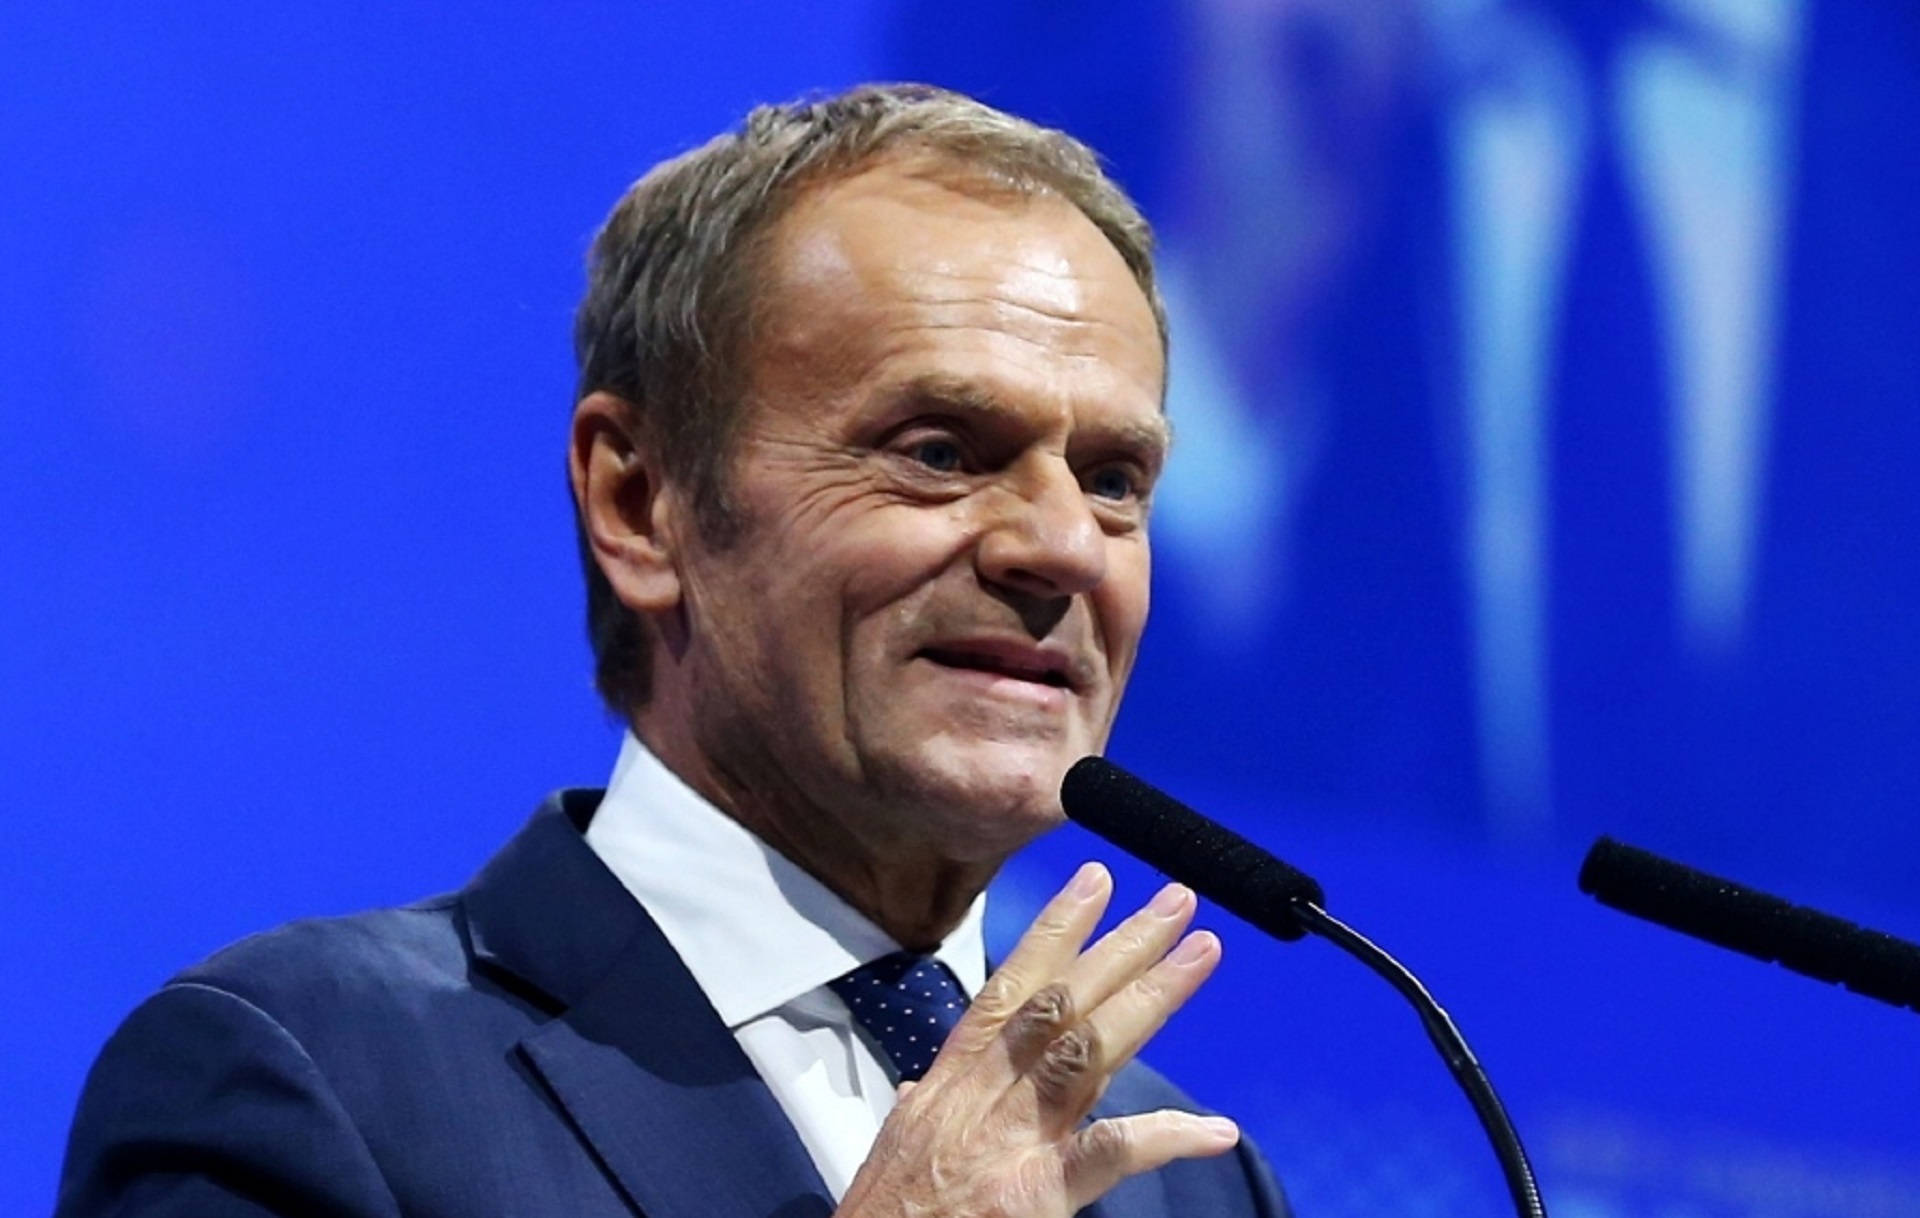 FILE PHOTO: Newly elected President of EPP Donald Tusk speaks during the EPP congress in Arena Zagreb hall in Zagreb FILE PHOTO: Newly elected President of European People's Party Donald Tusk speaks during the EPP congress in Arena Zagreb hall in Zagreb, Croatia November 20, 2019. REUTERS/Antonio Bronic/File Photo Antonio Bronic